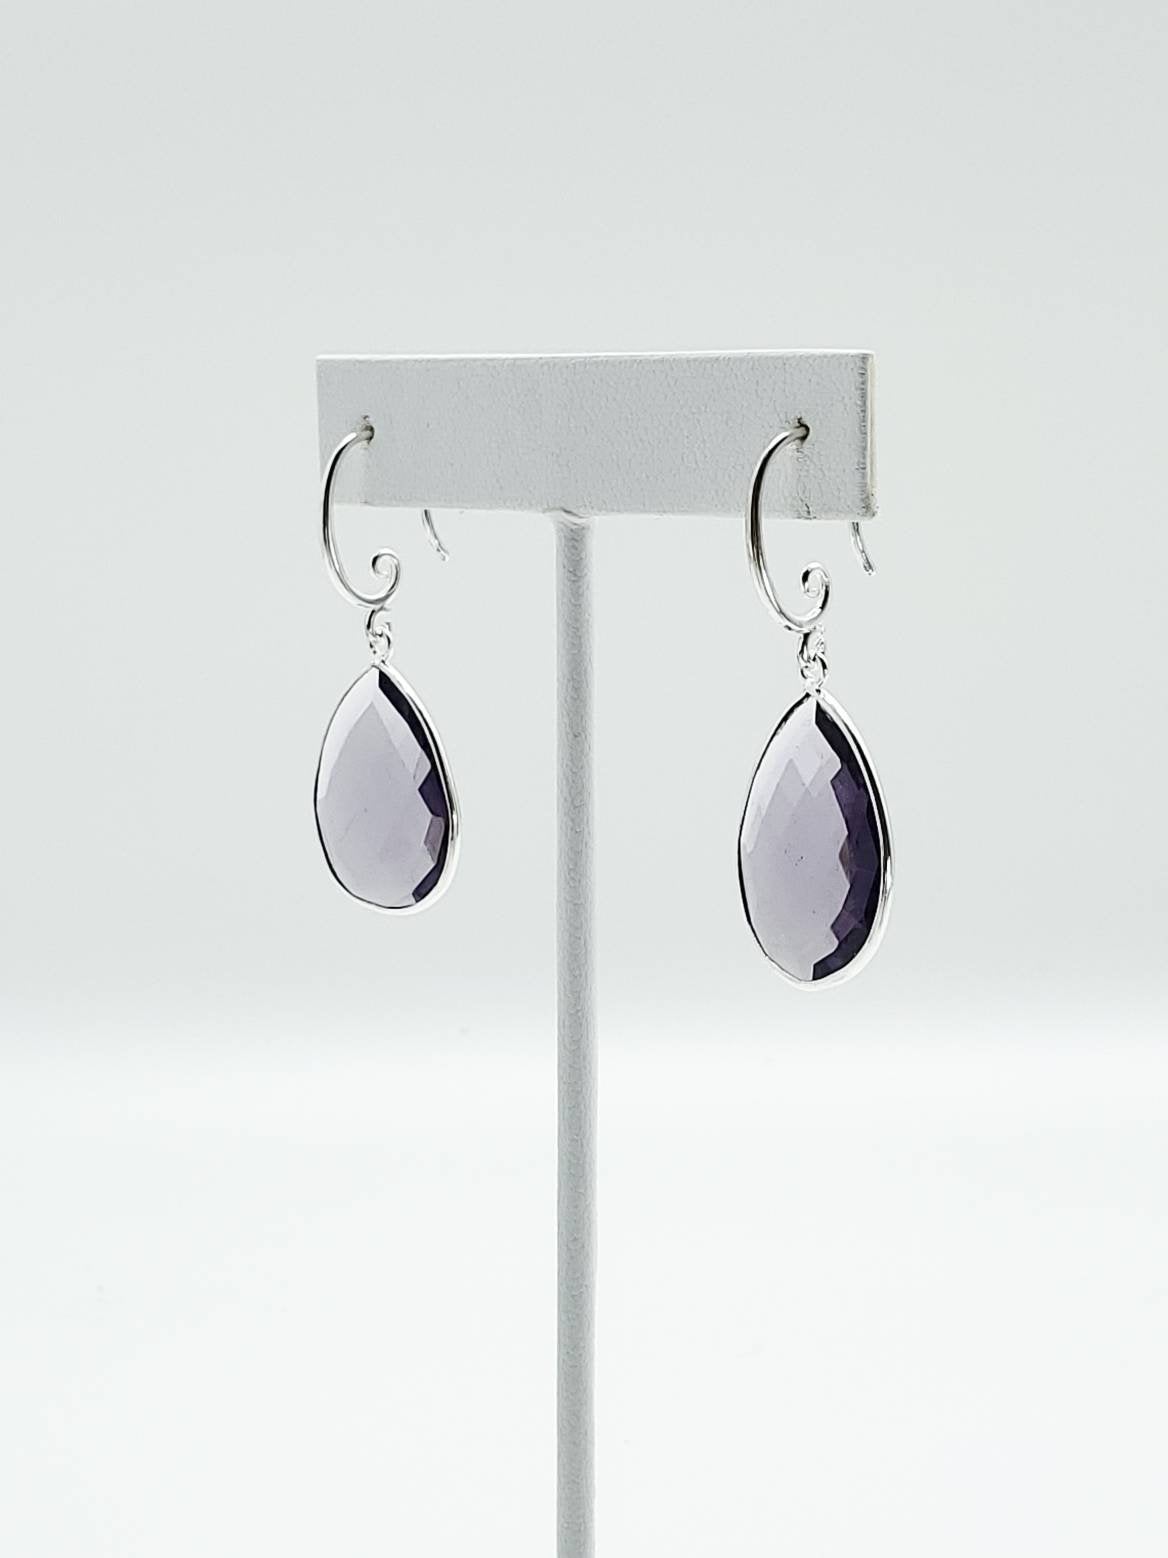 Silver Plated Pear Briolette Amethyst Bezel Earrings on Sterling Silver Ear Wires - The Caffeinated Raven